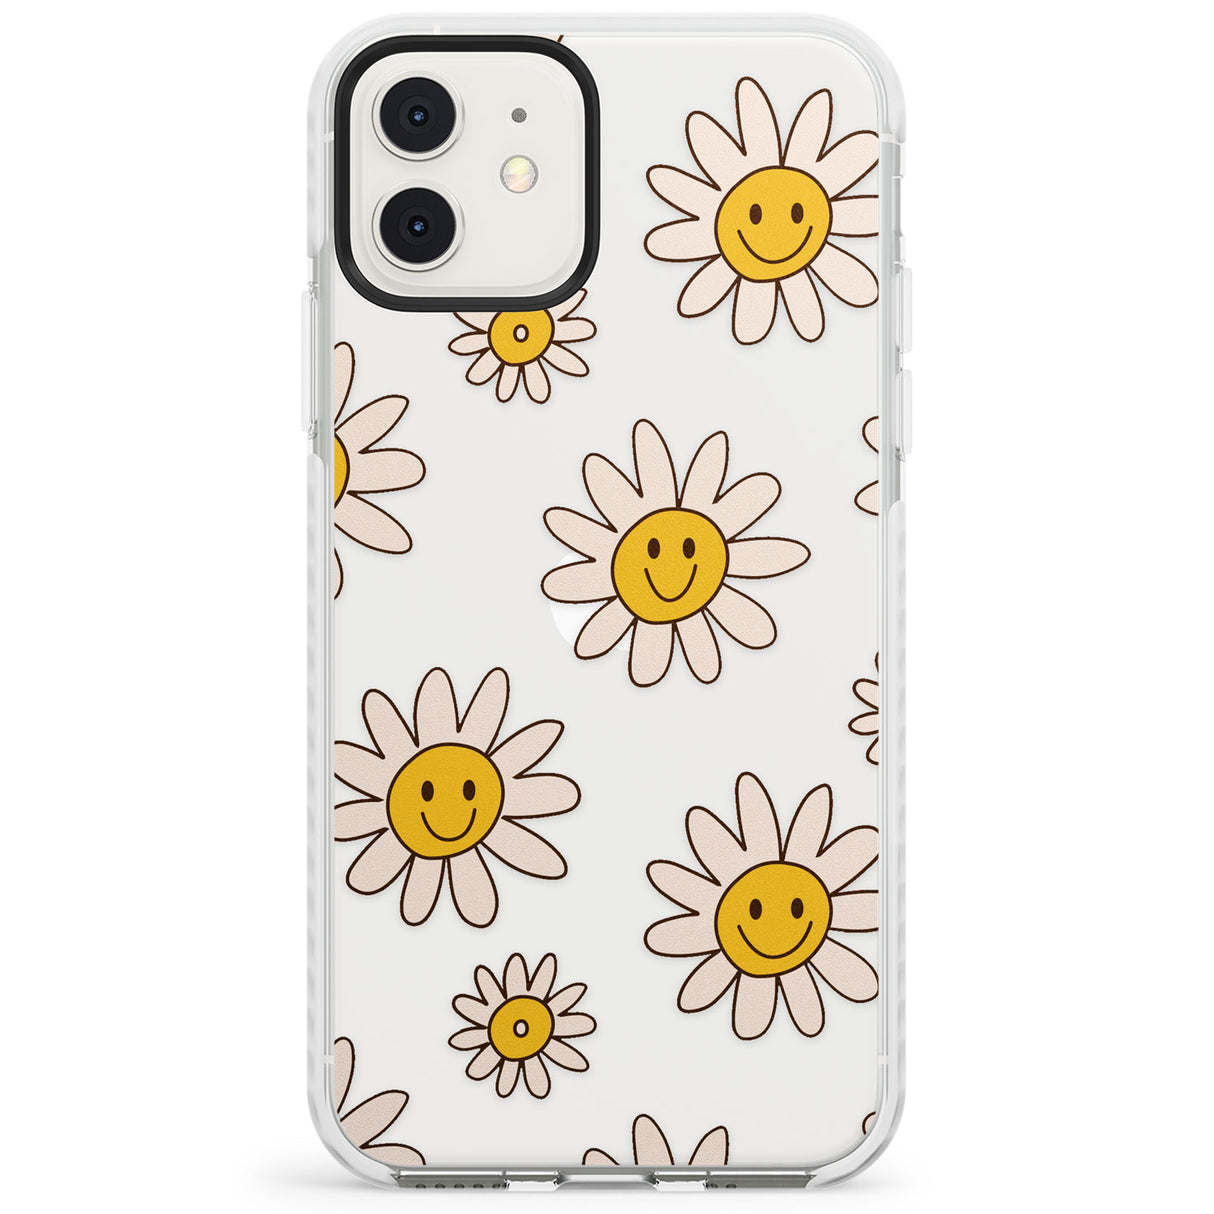 Daisy Faces Impact Phone Case for iPhone 11, iphone 12